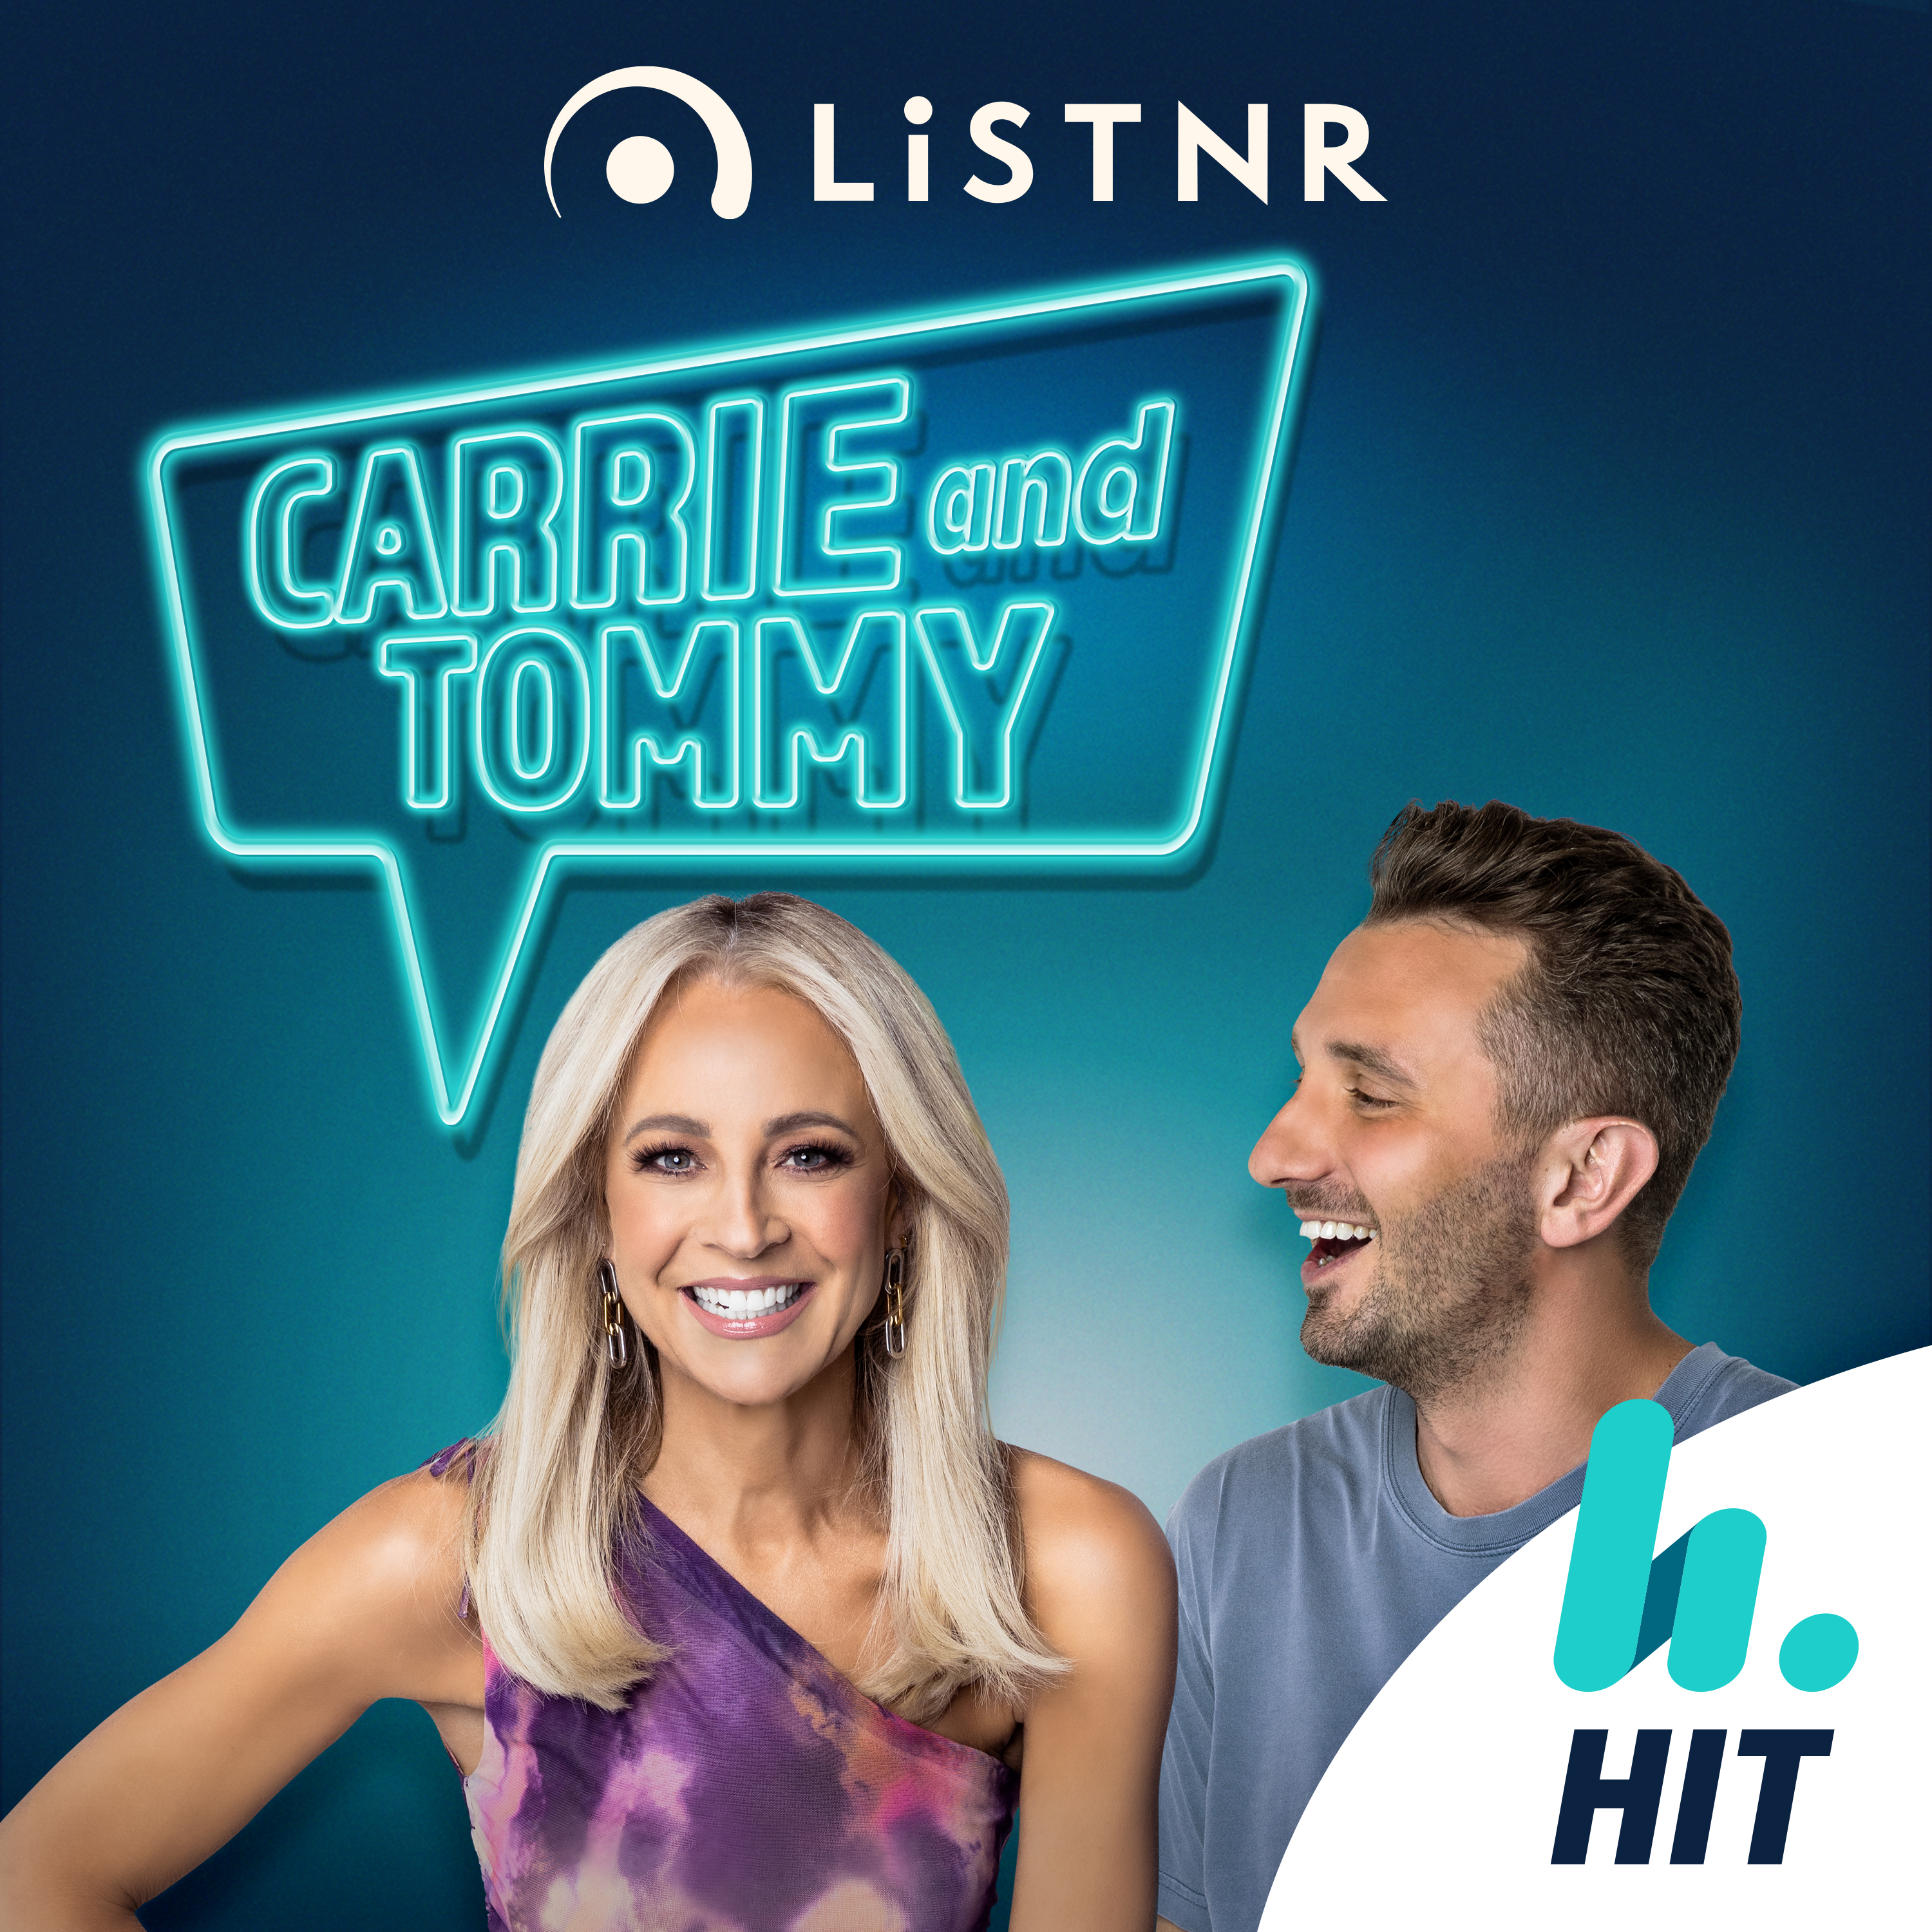 On Mix94.5 Tomma Hay (Tommy's Donna Hay knockoff) is BACK, the Time Game jackpots to $2800, AND Carrie teaches us all a new WORD!